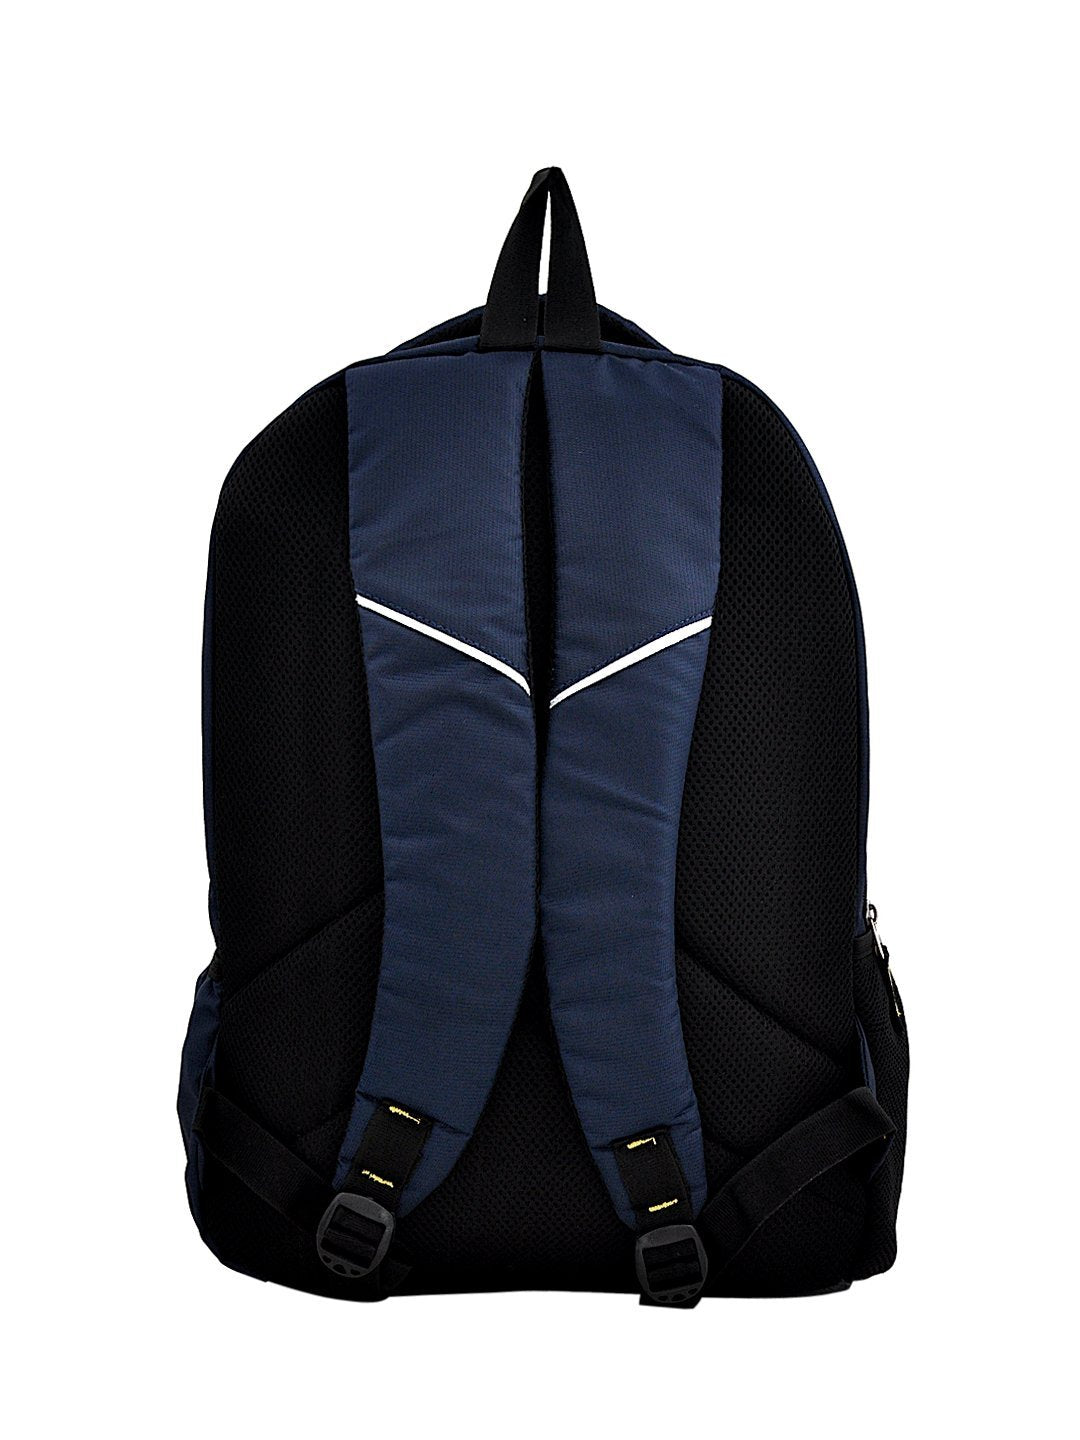 Blue Multi compartment Laptop Backpack